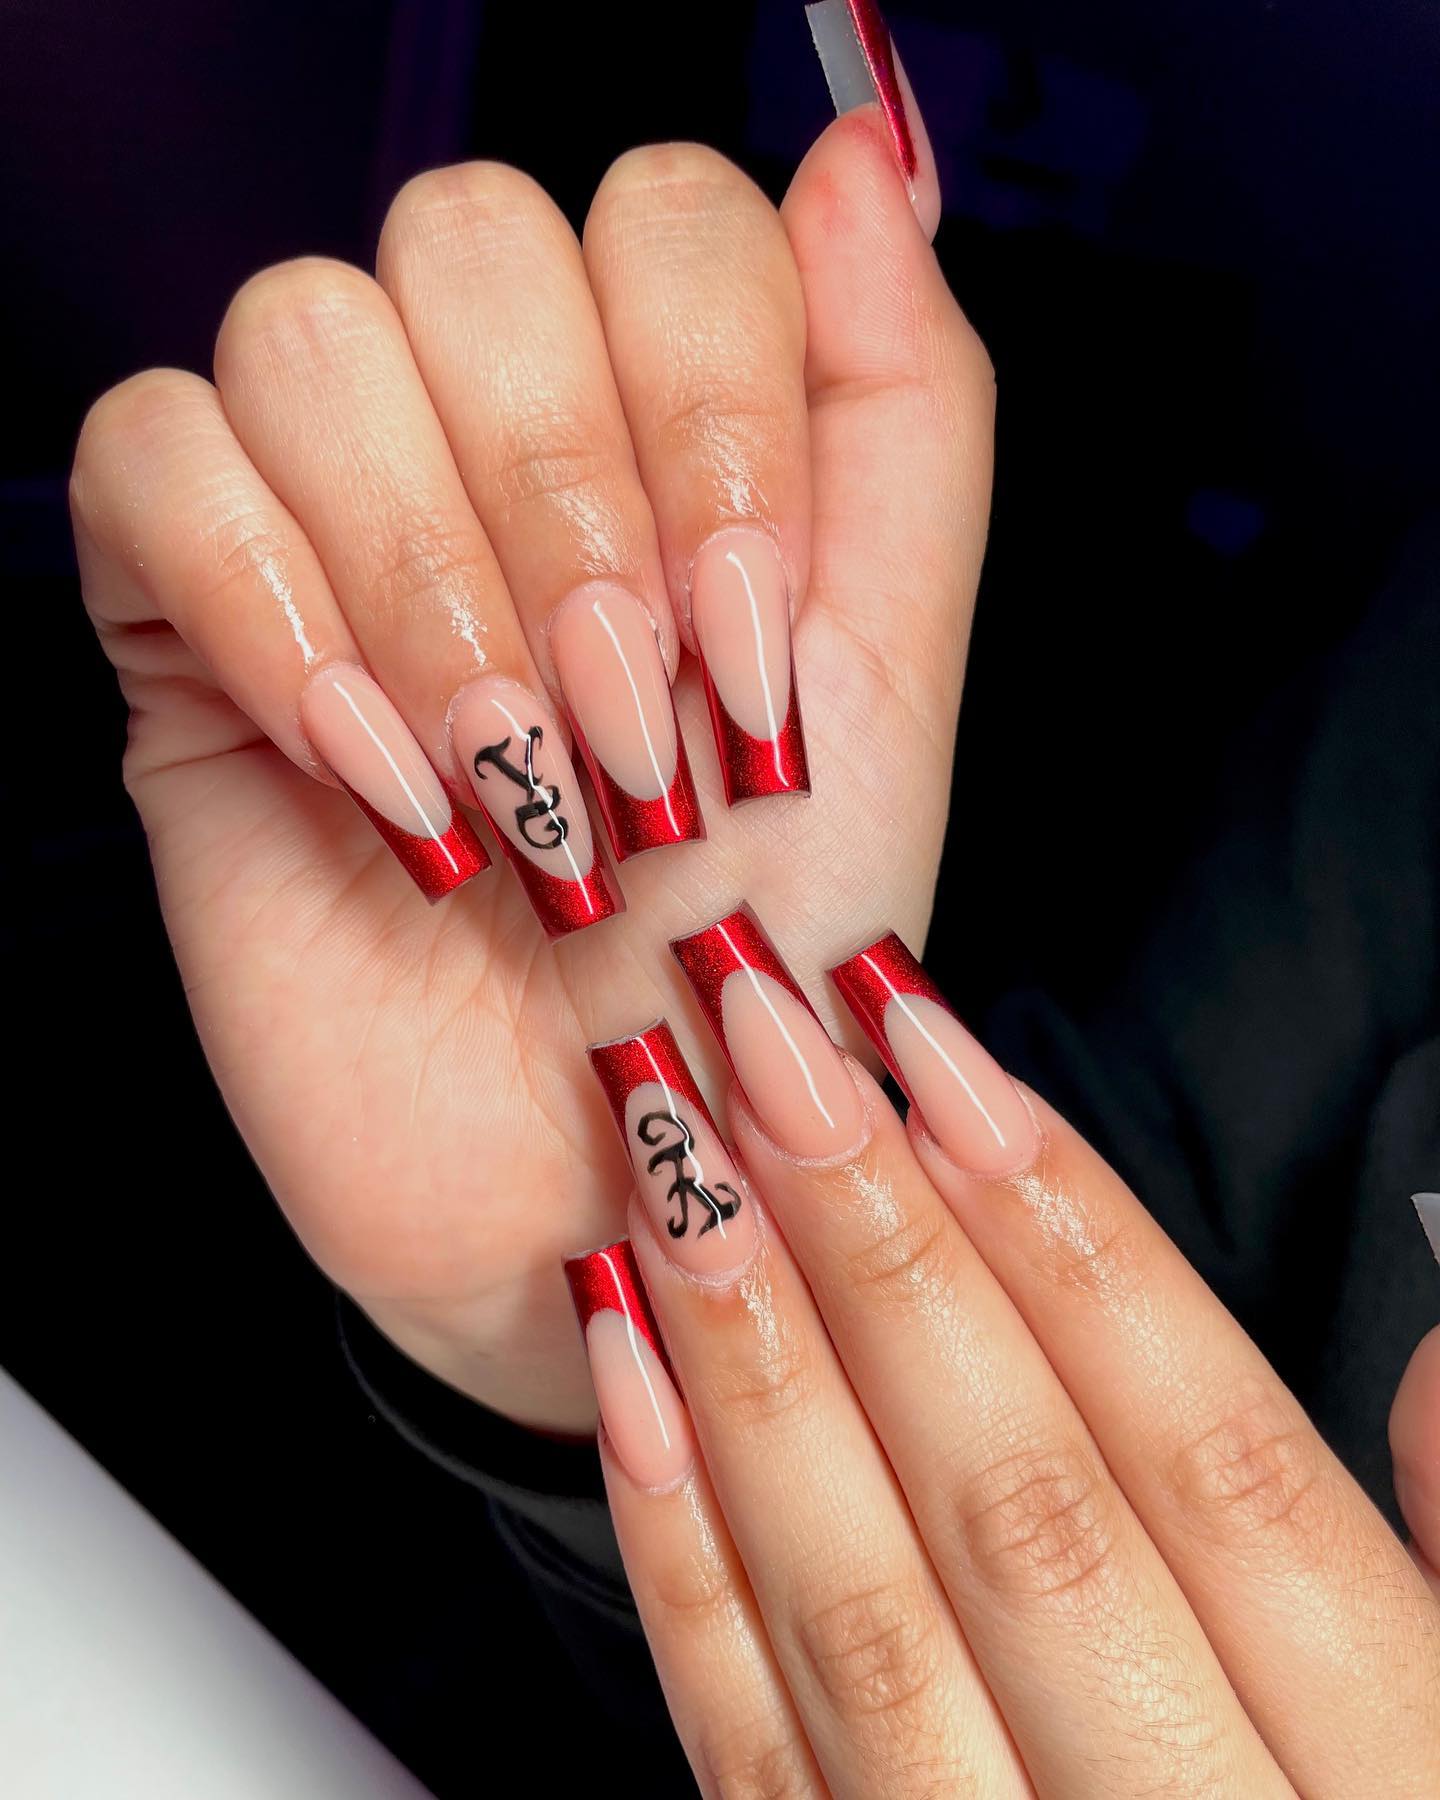 Red Chrome French Tip Nails with black character on ring finger